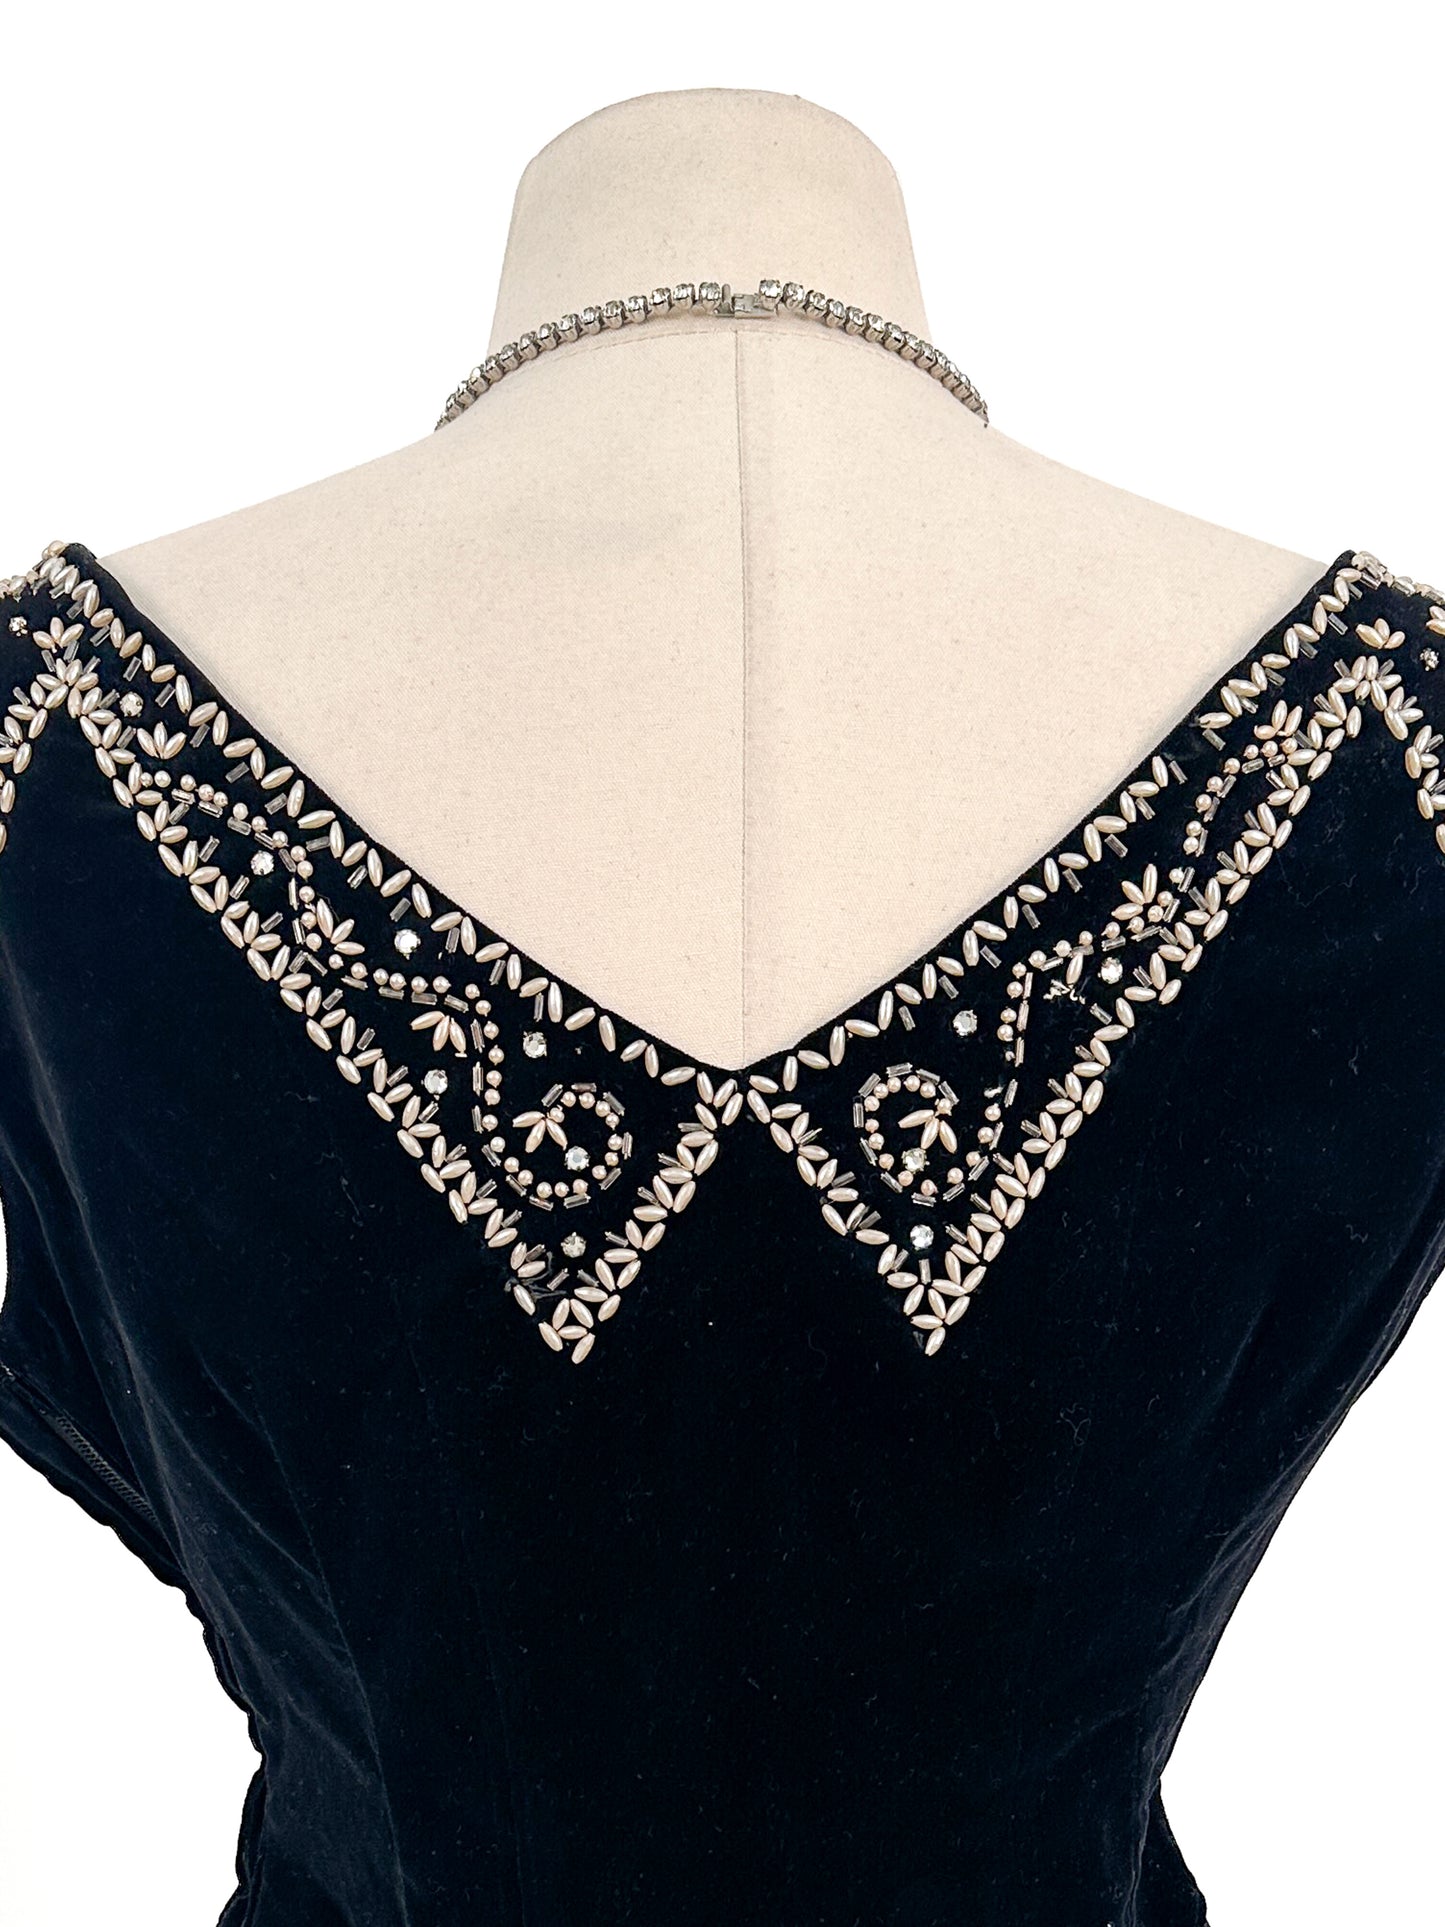 1950s Velvet Beaded Top with Pearls and Rhinestones / Bust 38"